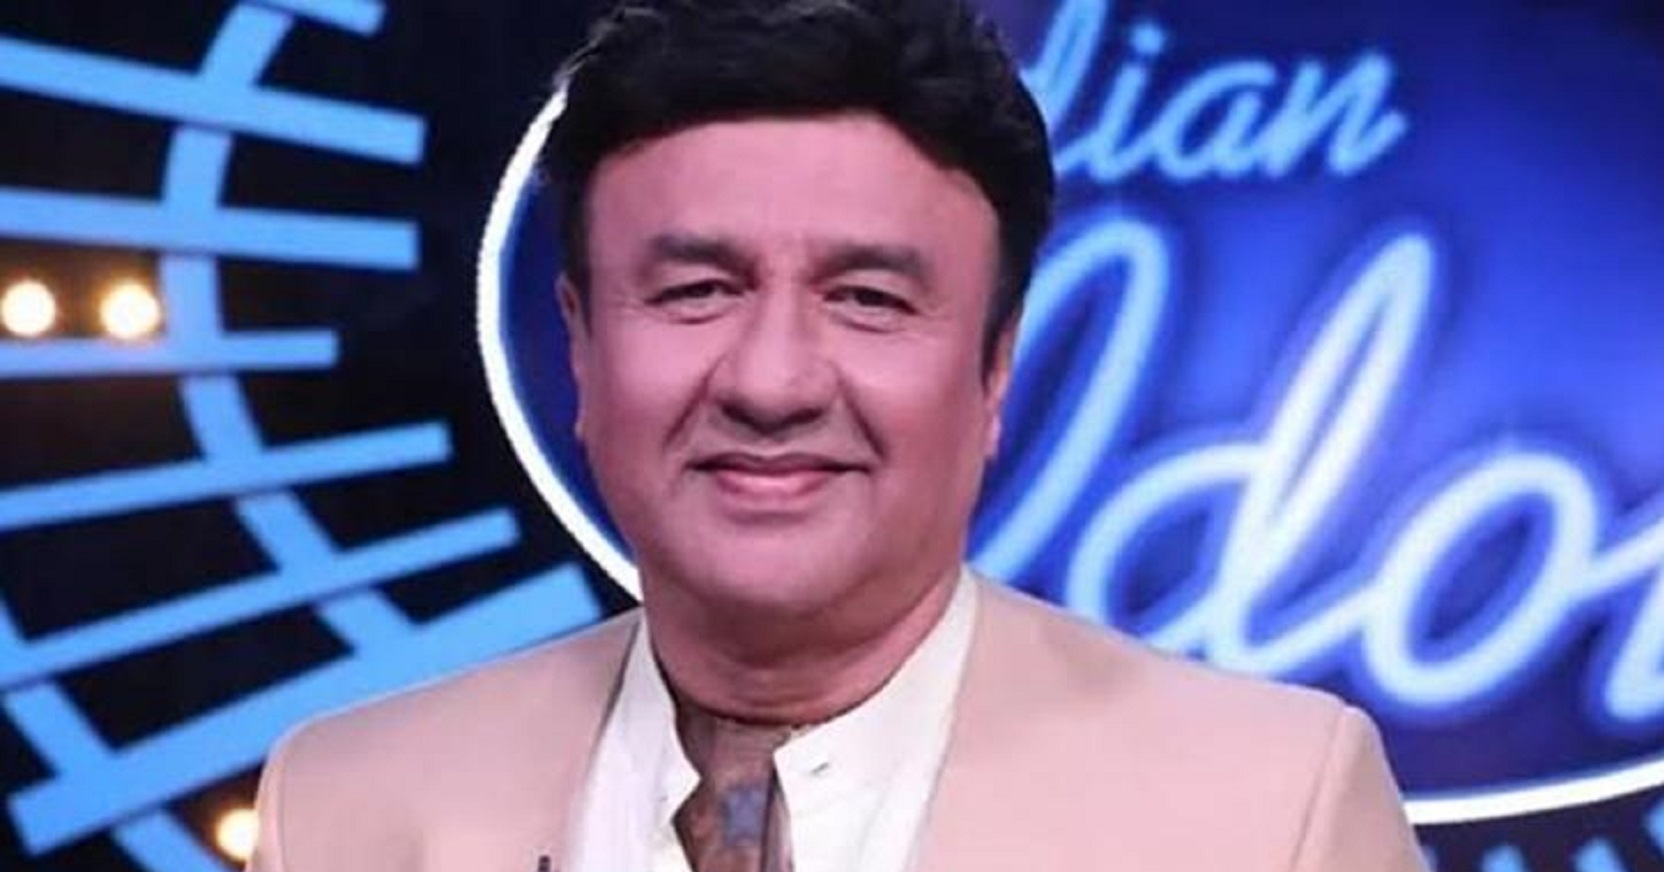 Anu Malik Returning To Indian Idol, After #MeToo Sexual Harassment Allegations Against Him